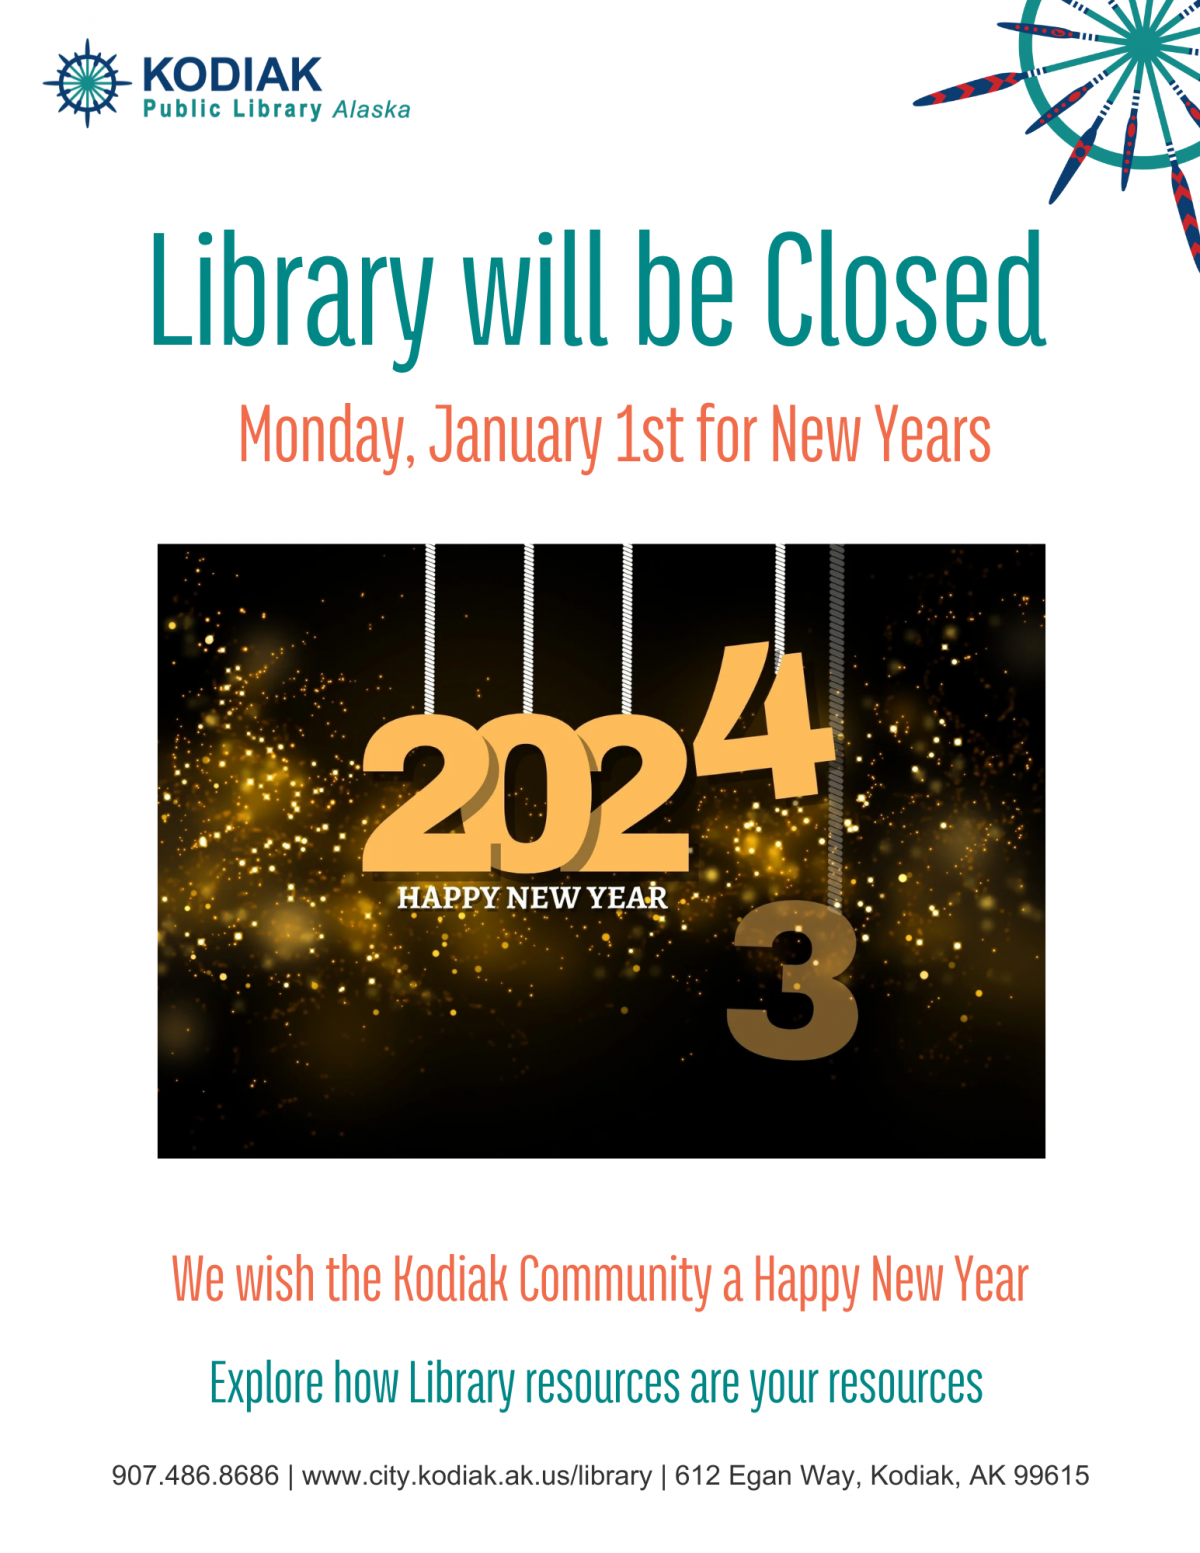 Closed New Years